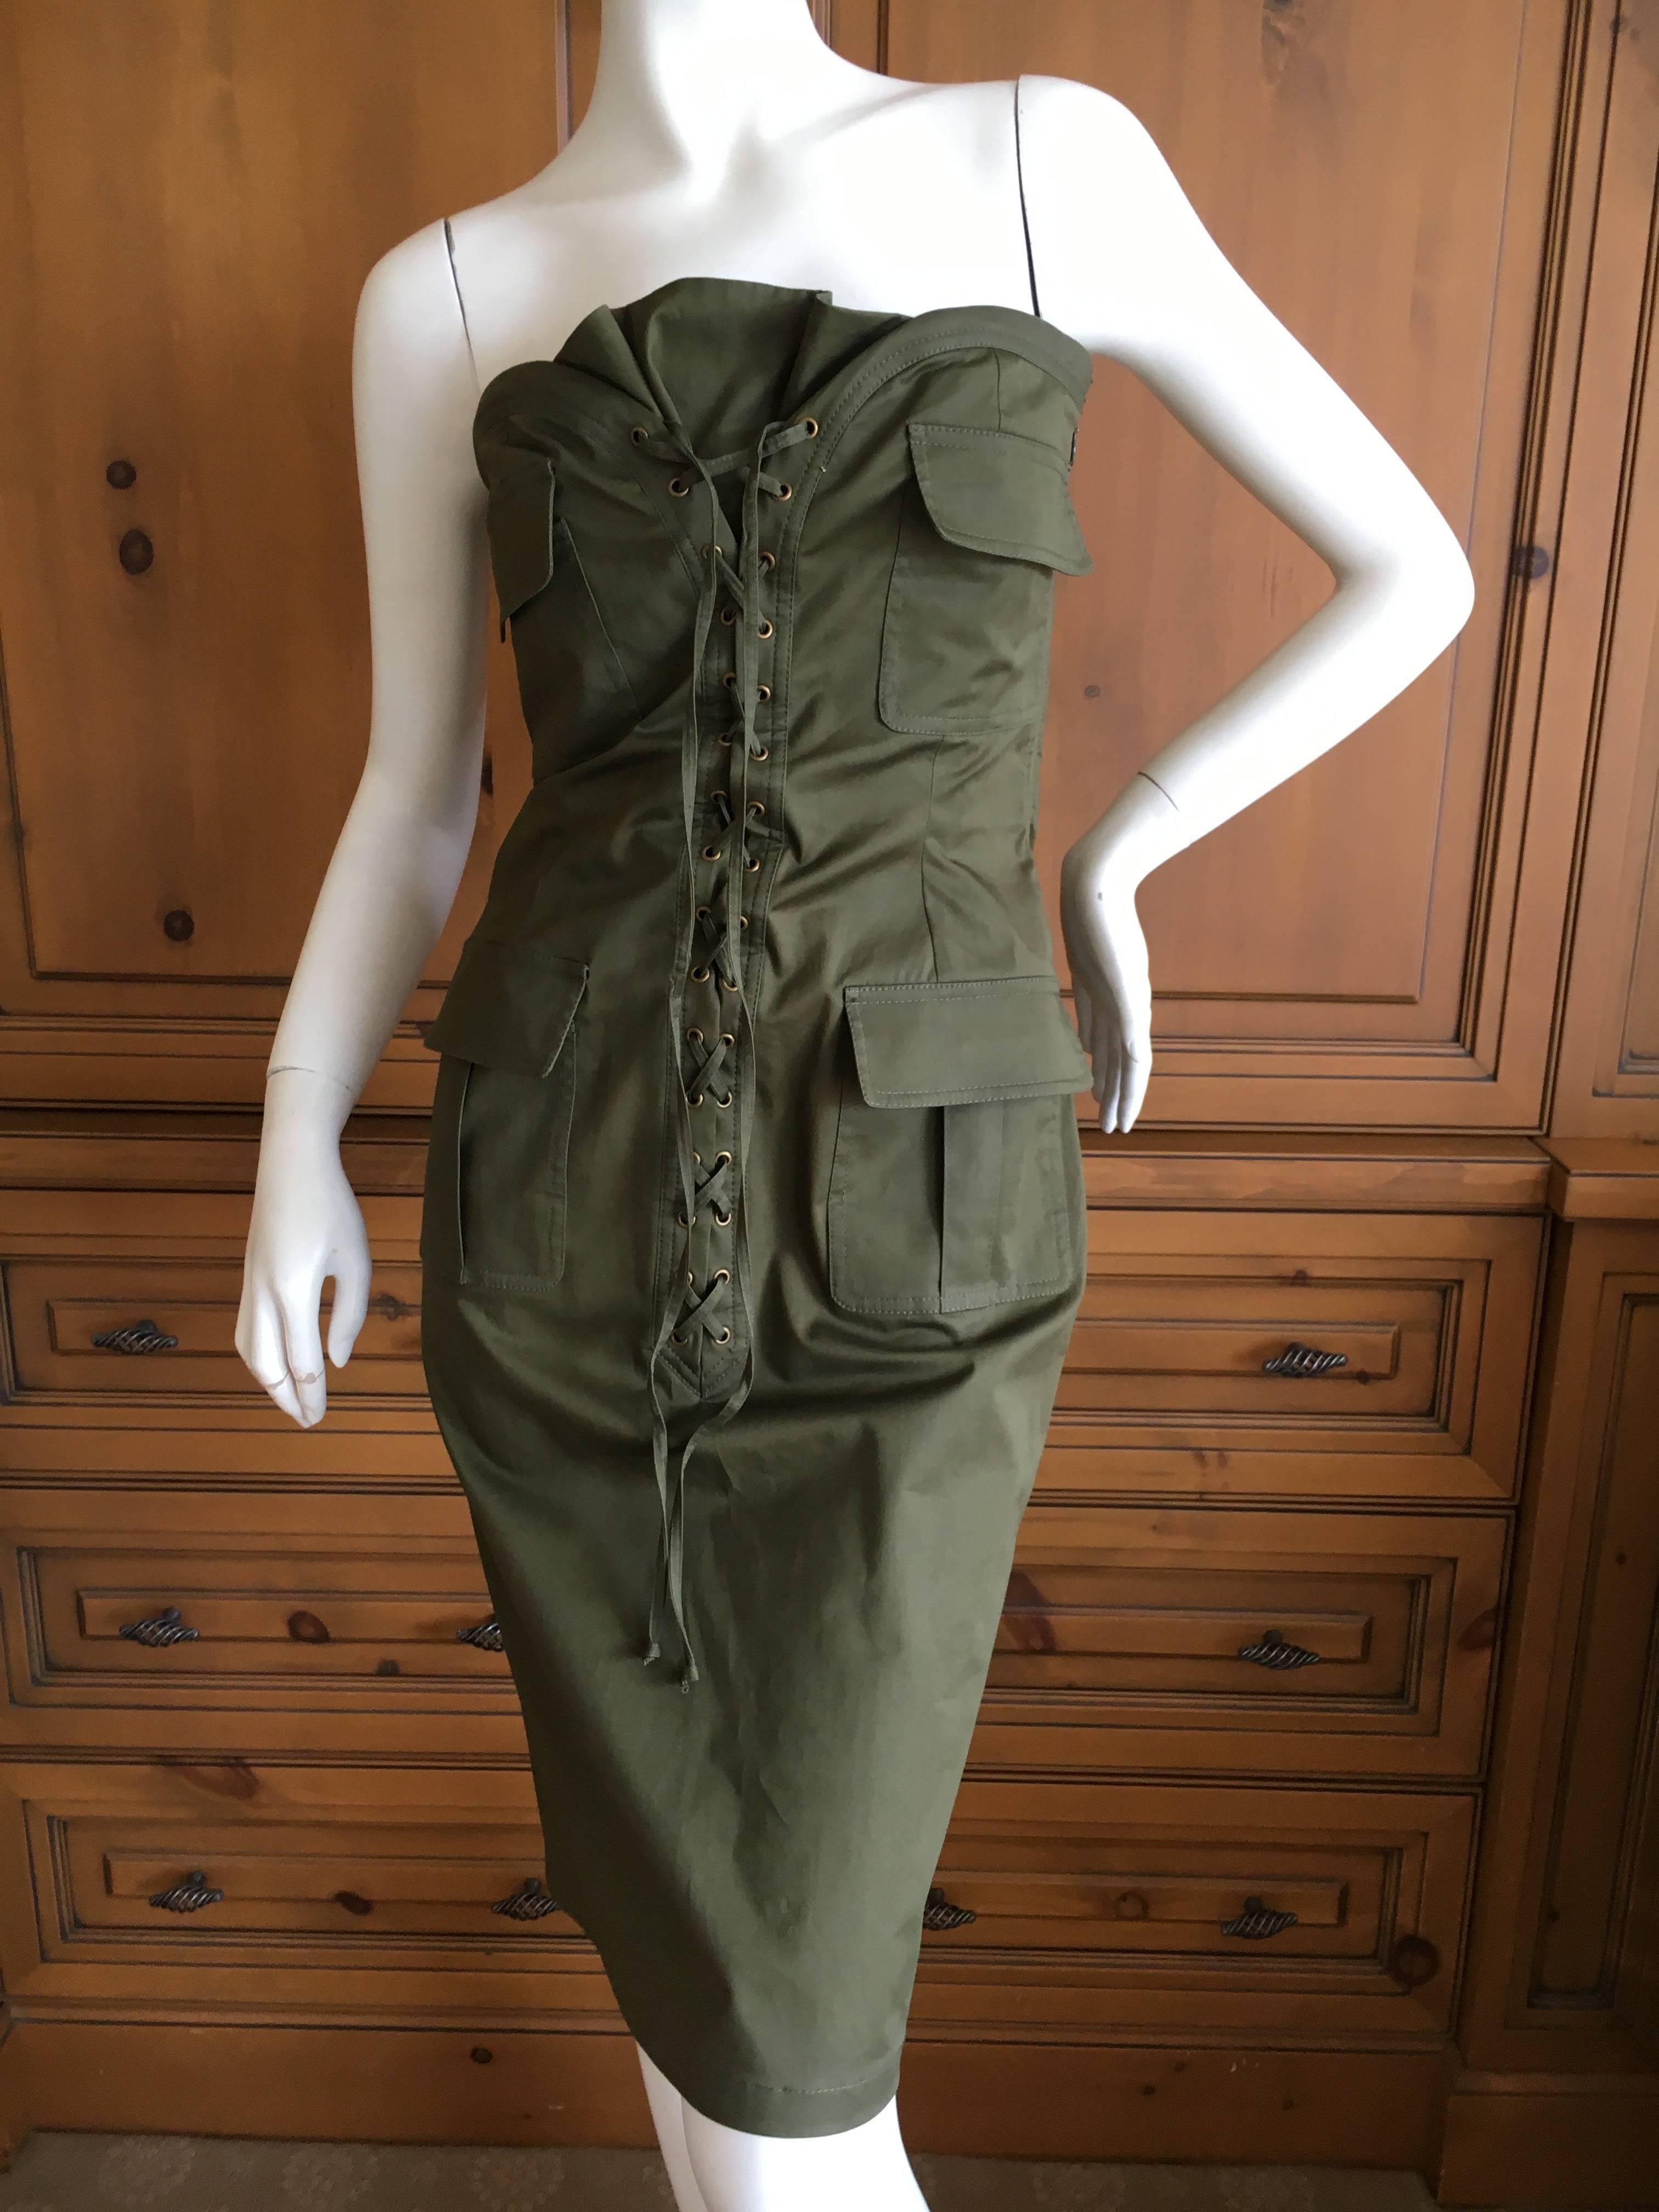 Yves Saint Laurent by Tom Ford Strapless Safari Dress with Corset Lacing For Sale 2